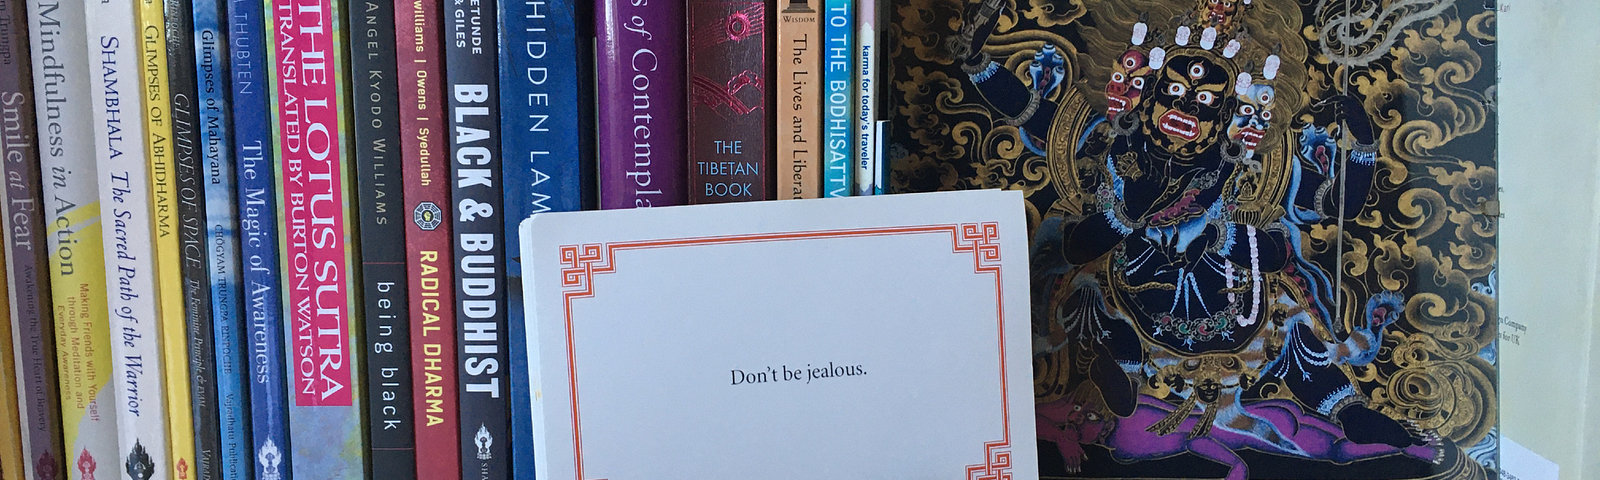 Lojong card that reads, “Don’t be jealous,” sits on a bookshelf in front of some books and an image of a four-armed Mahakala.